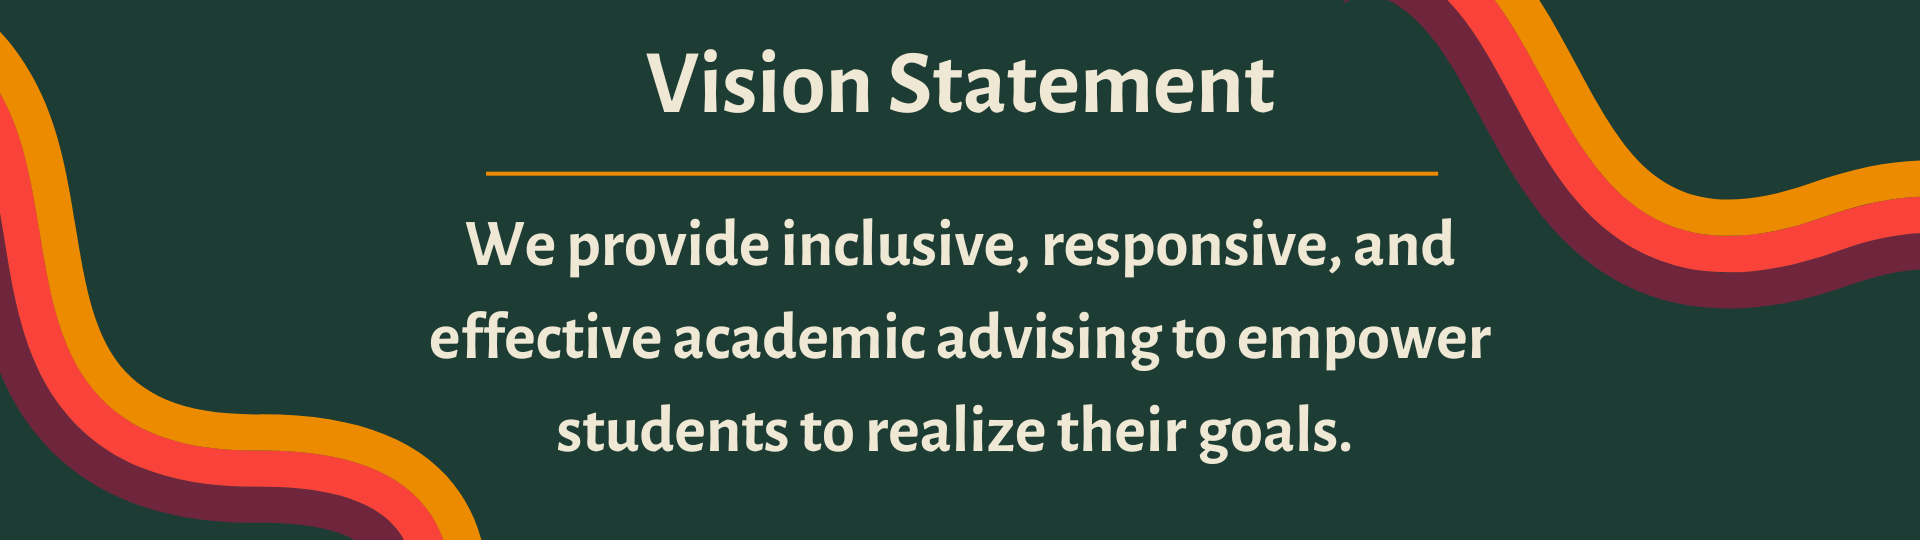 vision-statement-2.0.png